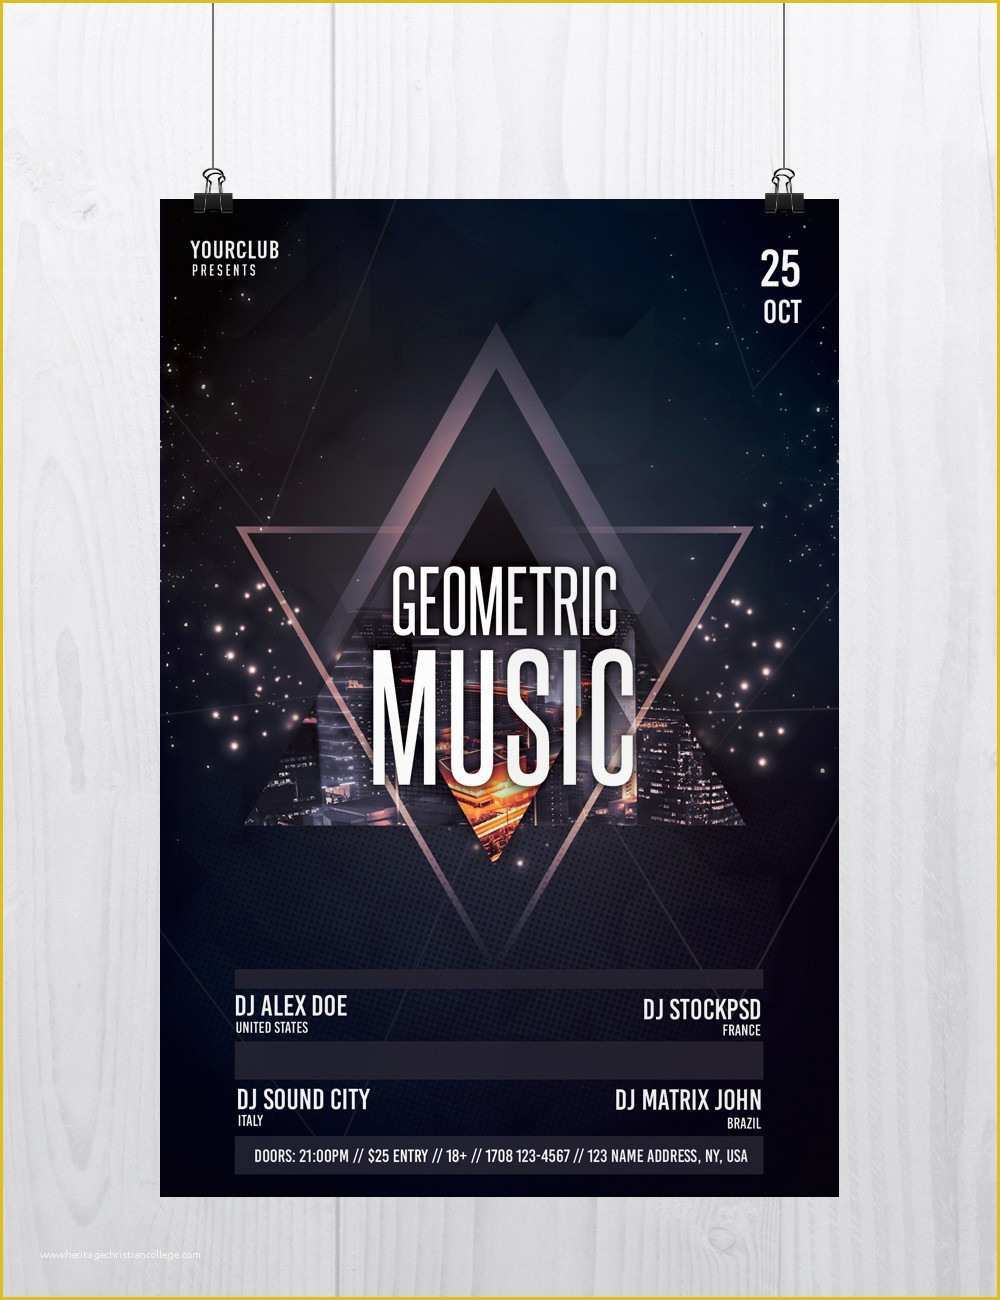 Free Ad Templates Photoshop Of Geometric Music Free Psd Flyer Template Stockpsd